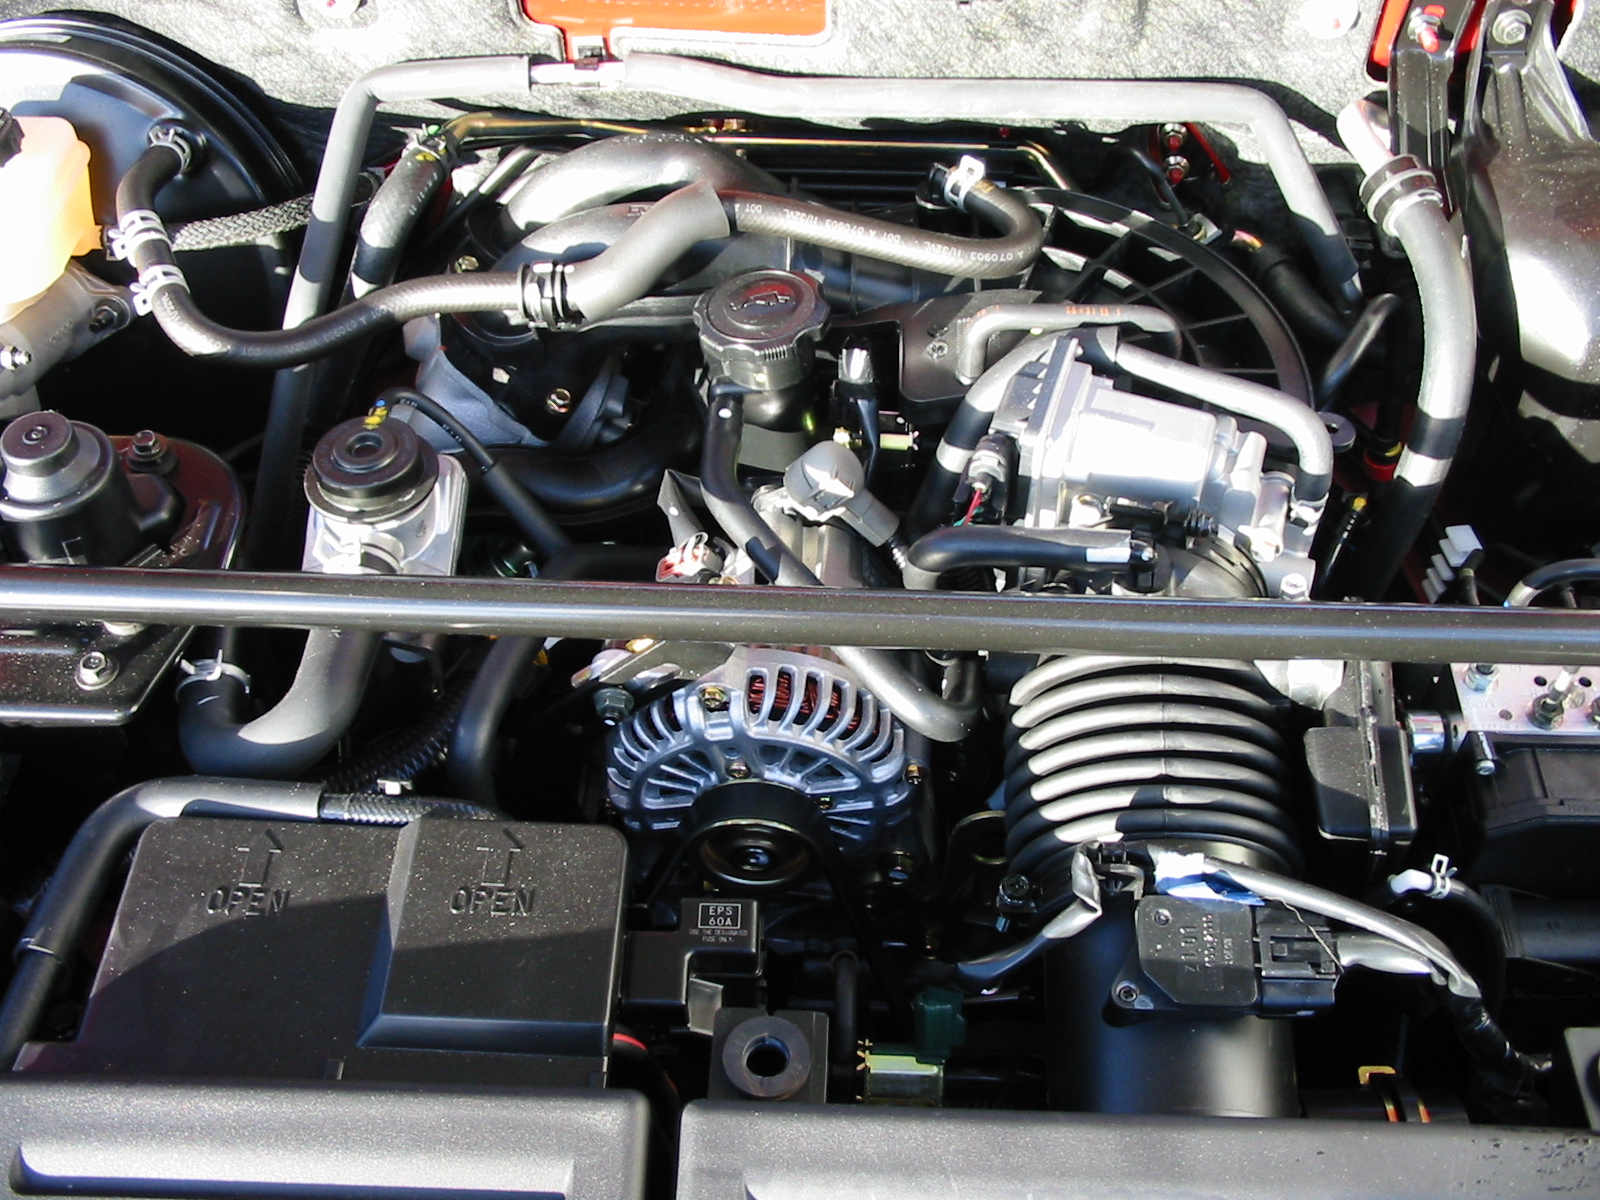 Mazda_rx-8_engine_bay_with_cover_removed.jpg